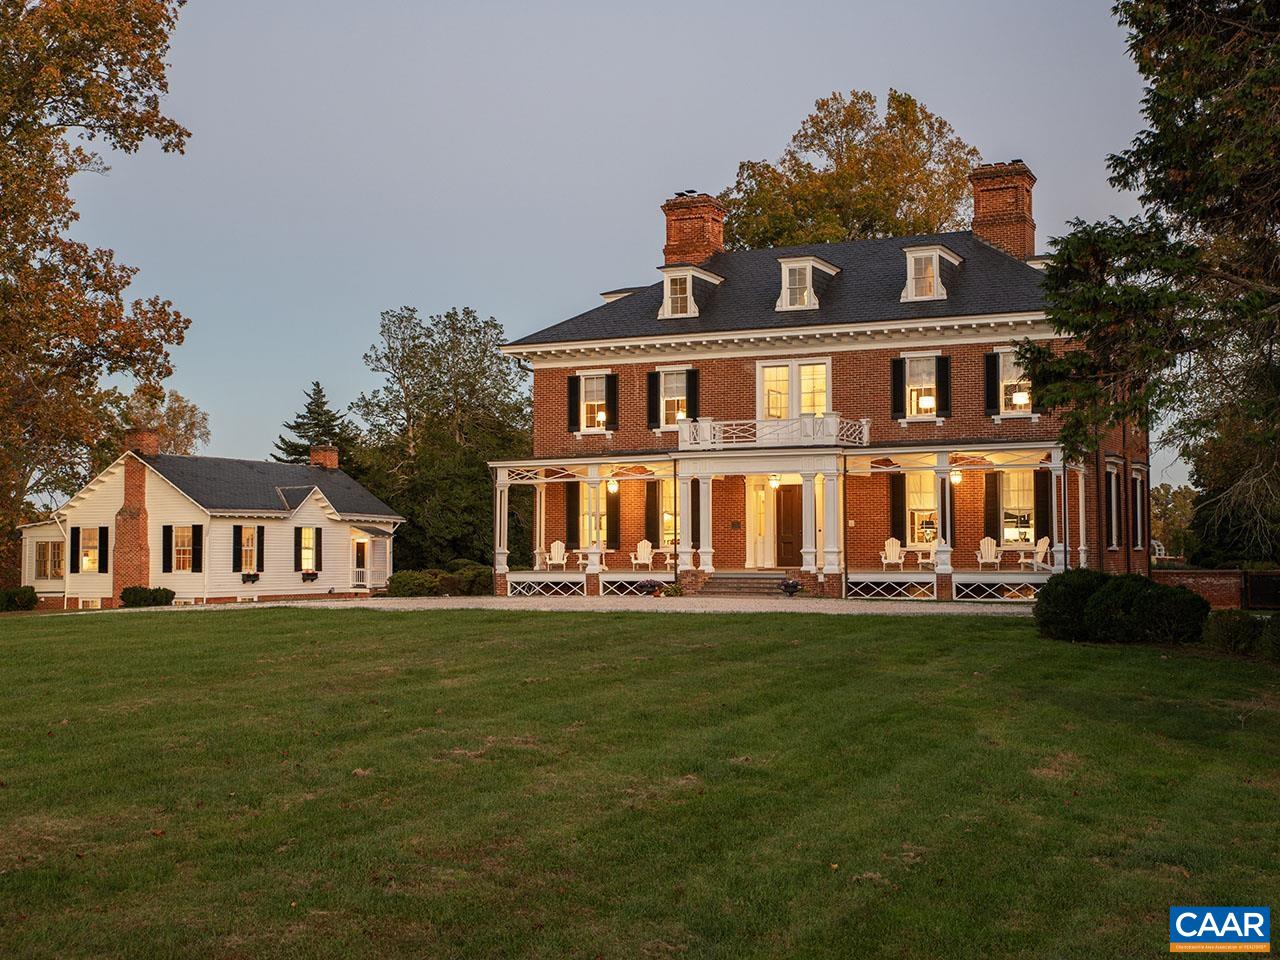 Seldom does an opportunity arise to acquire an estate near Charlottesville that combines architectural elegance, natural beauty and a deep sense of history.  Cobham Park, c.1856, impeccably restored & updated in 2018, is an exceptional private country estate in Keswick. The spacious & stately home offers 5 bedrooms, 5.5 baths, 9 fireplaces, a chef's kitchen with a custom Officine Gullo stove, formal & informal rooms & a wonderful Pub for entertaining.  Most of the original woodwork remains in the home including the iconic McSparren flying spiral staircase which is similar to the Montmorenci Staircase at Winterthur. The grounds, 286 acres of lush rolling pastures & hardwood forests, also include beautiful, low-maintenance gardens, a pool/brick pool house, springs & pond, 5 cottages & multiple farm buildings & workshop.  Cobham Park is located 15 minutes from Charlottesville & in close proximity to many of the areas best wineries & cideries.  The land is not under a conservation easement; however it would be a great candidate.